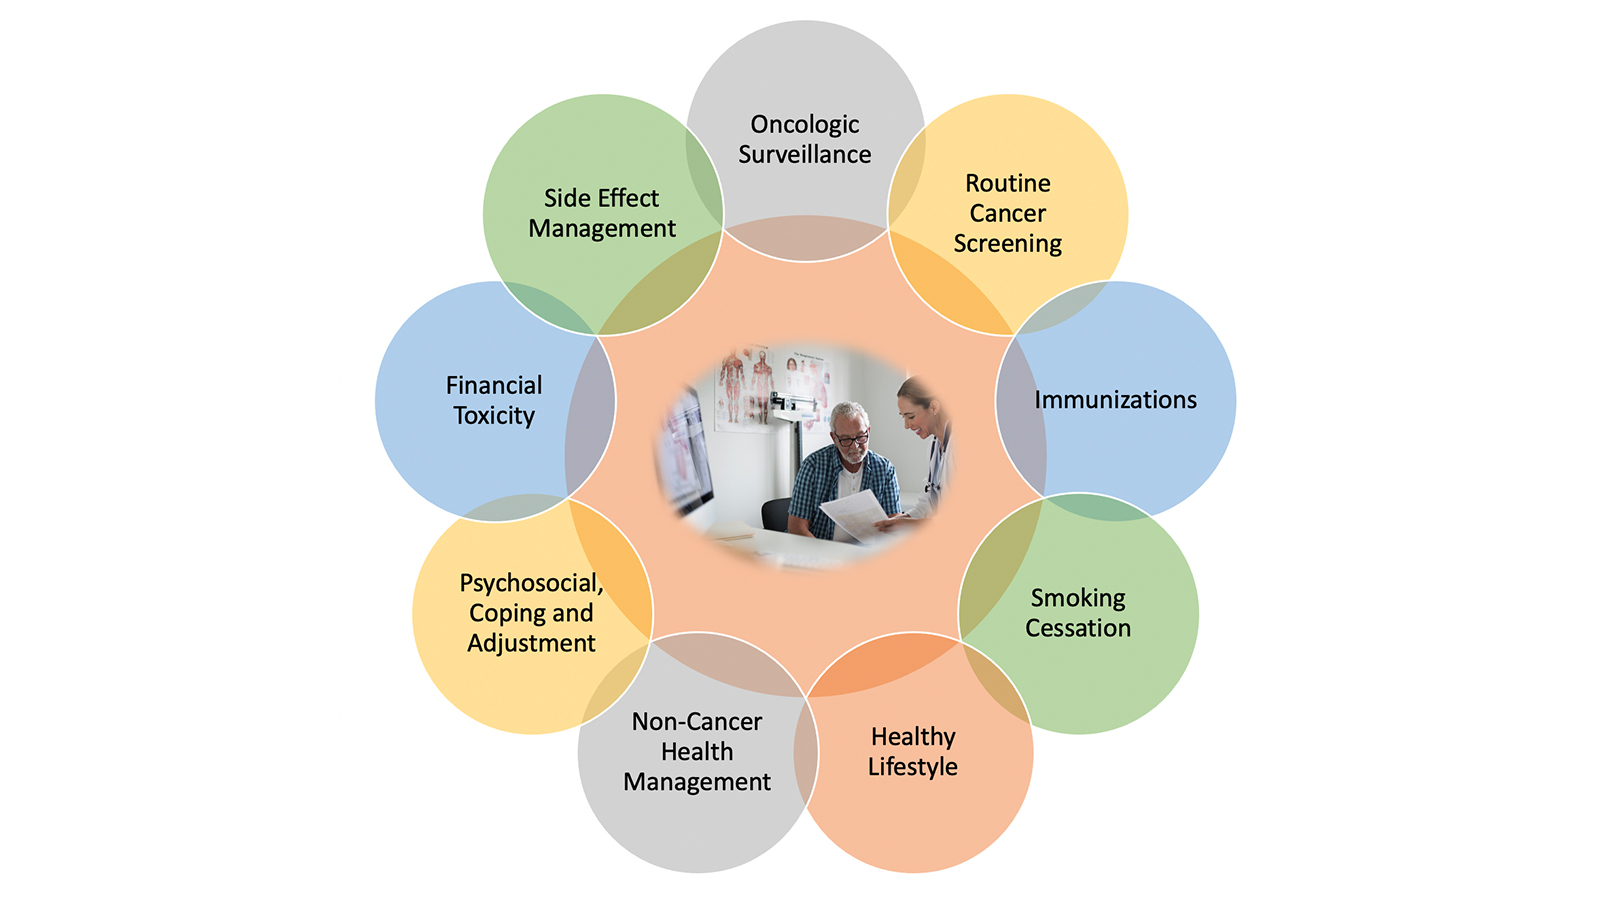 Ensuring Quality of Life During Lung Cancer Survivorship Requires a Multidisciplinary Team